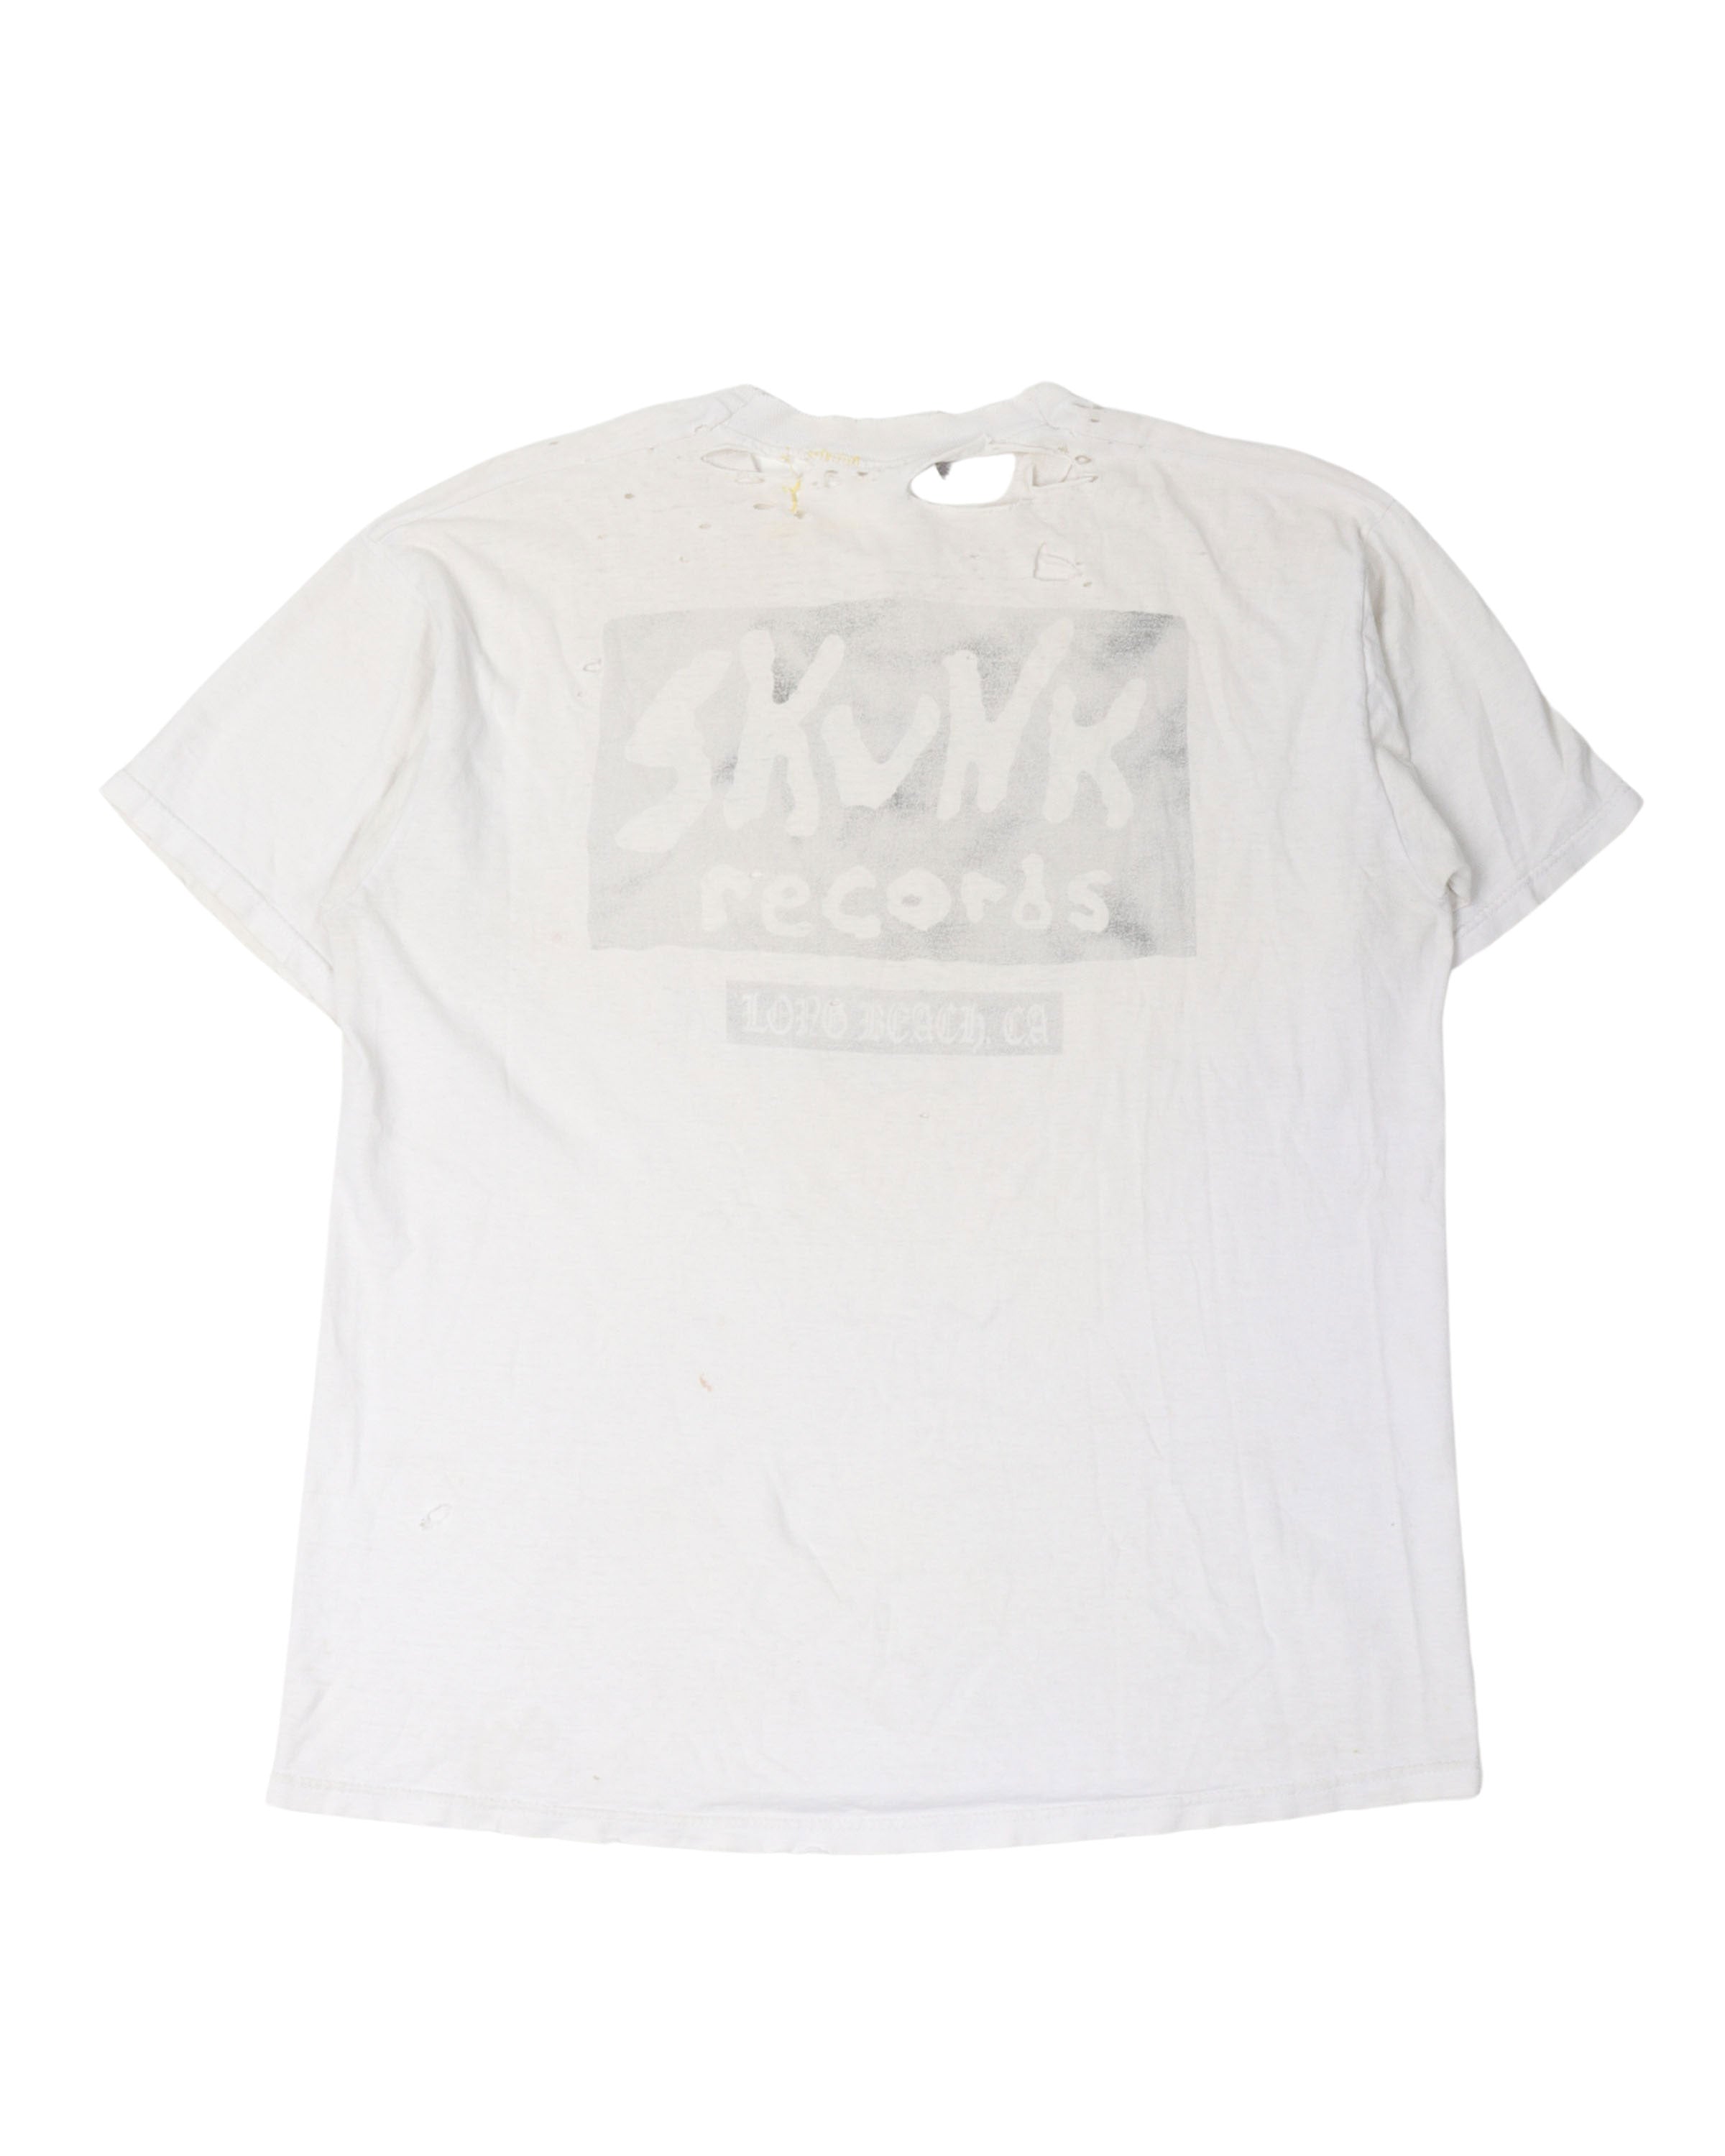 Sublime Skunk Records T-Shirt